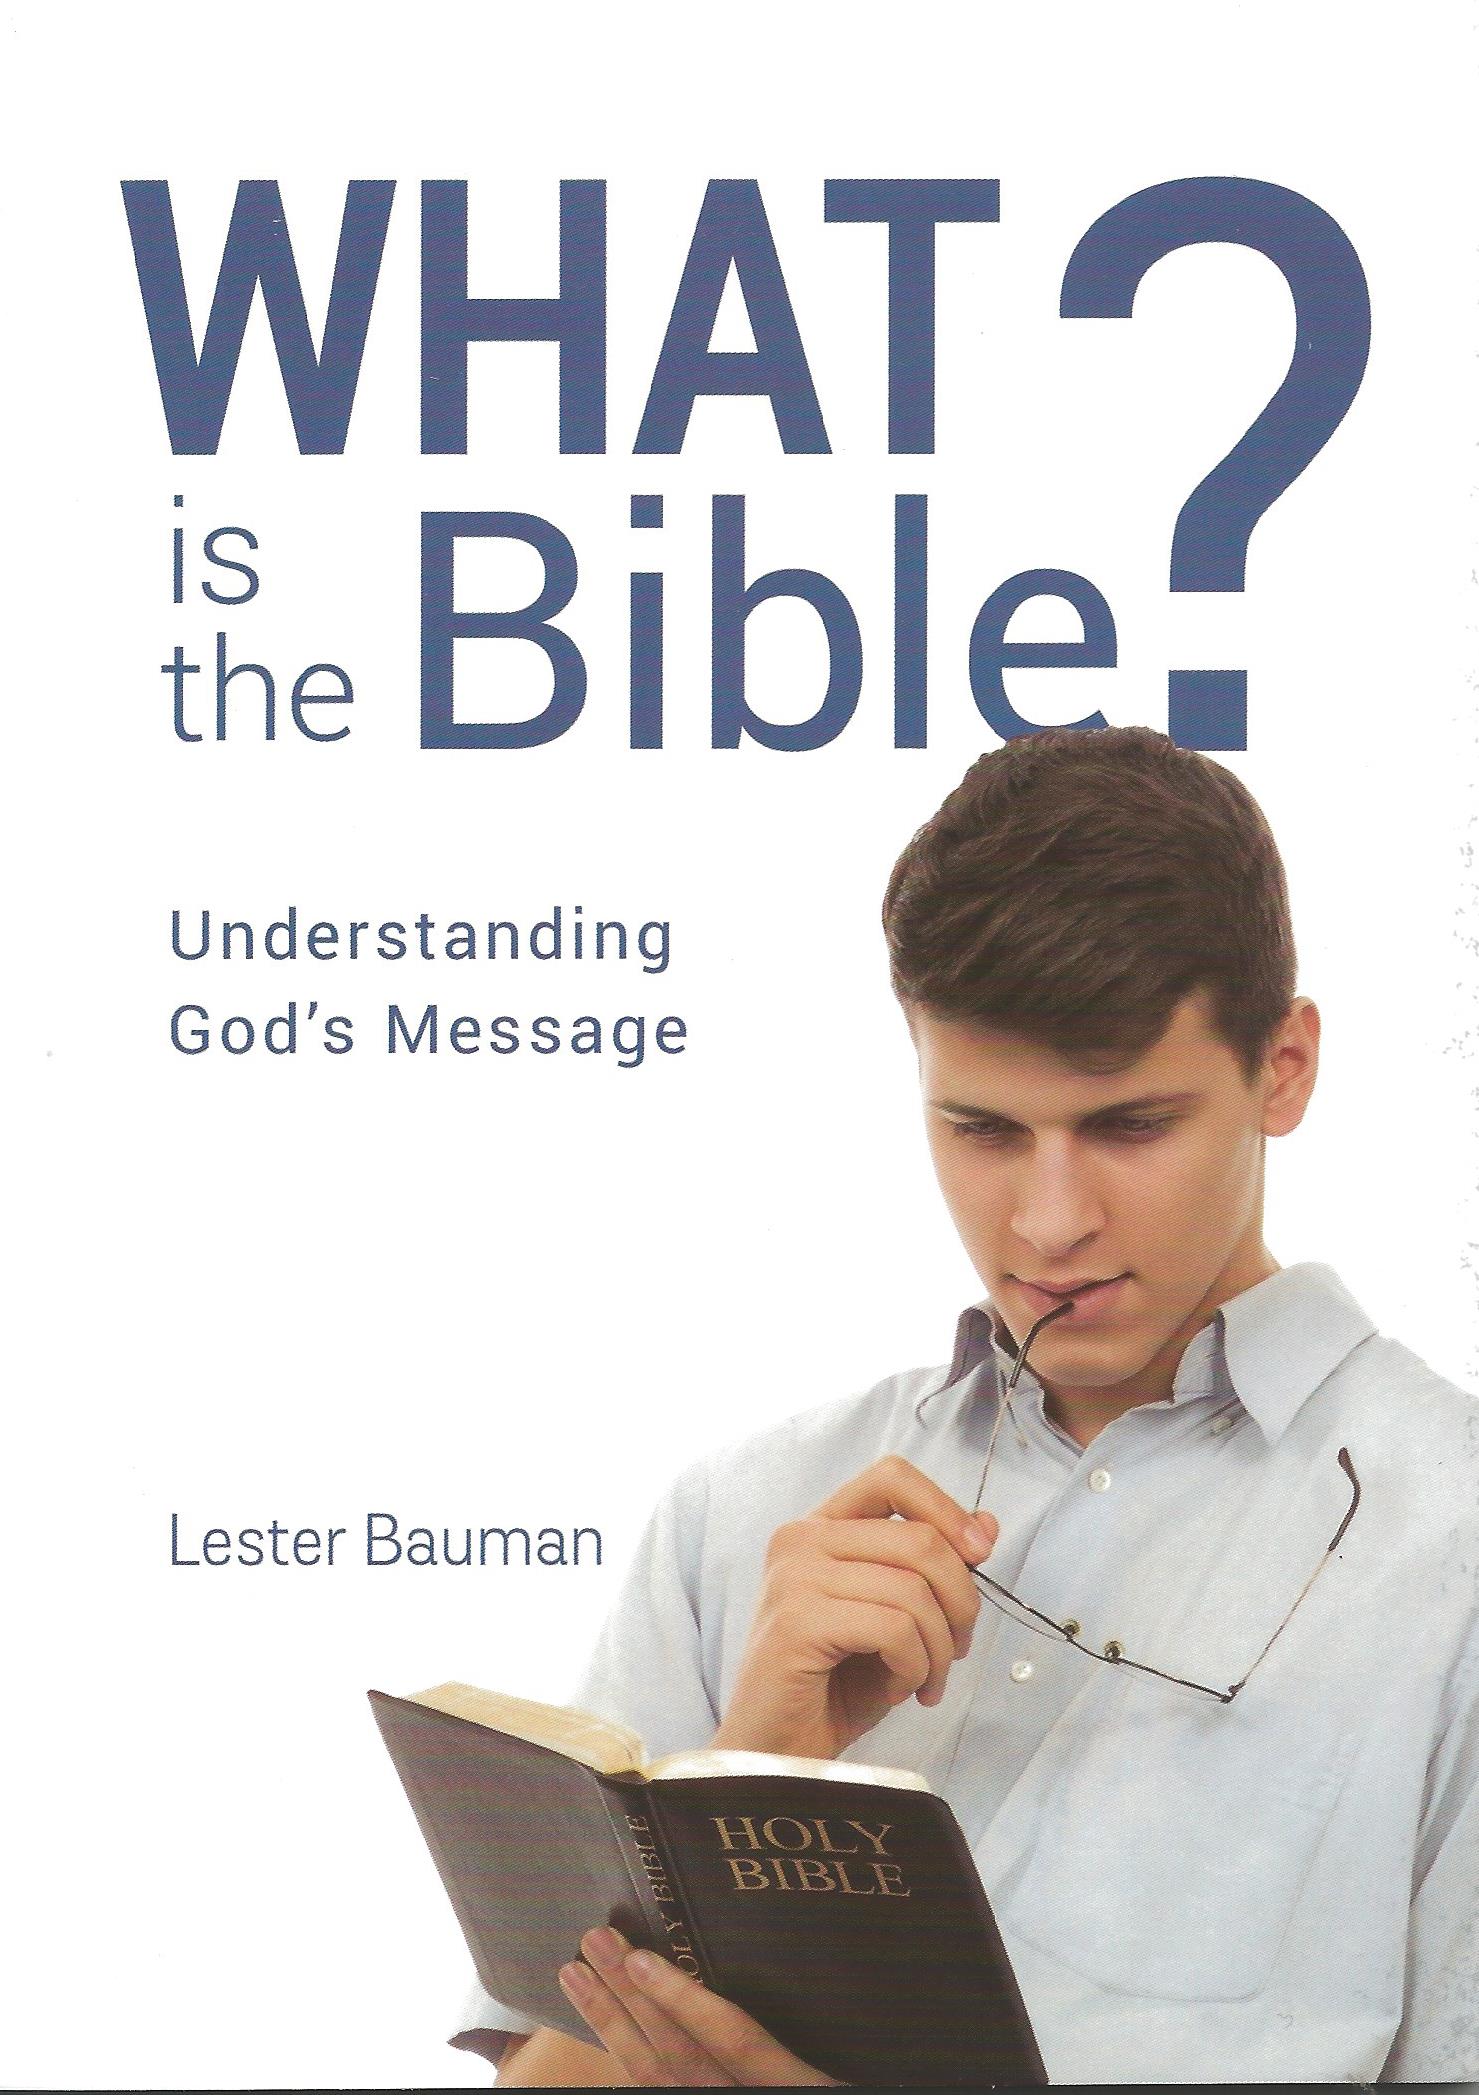 WHAT IS THE BIBLE? Lester Bauman